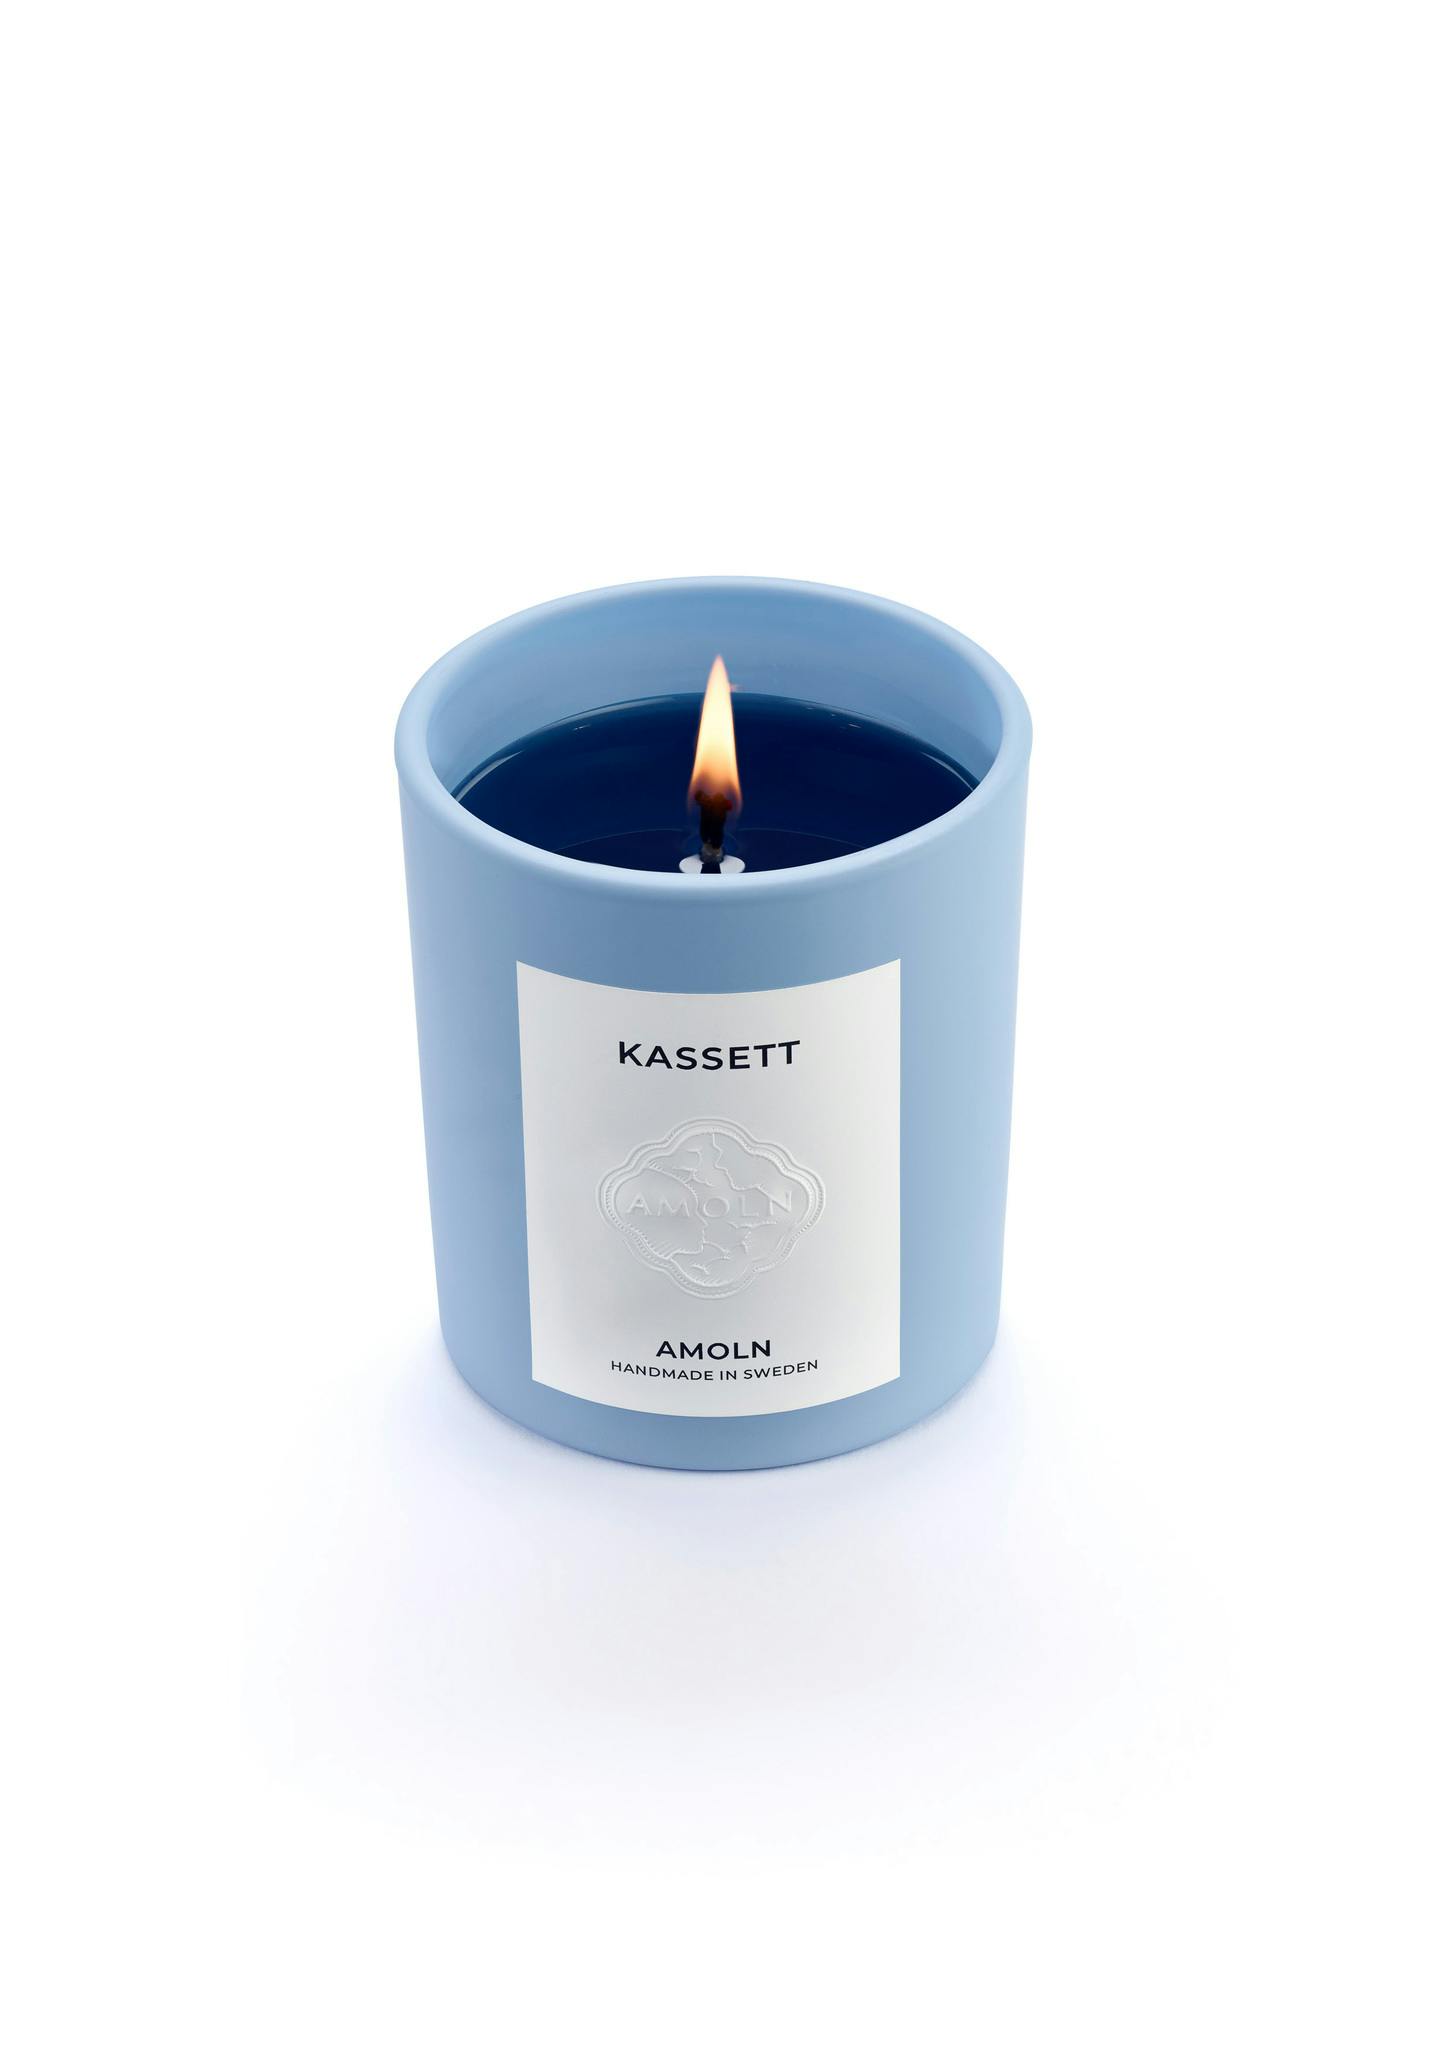 Light blue ceramic candle jar with a vegan, scented candle in blue wax for a luxurious gift. Handcrafted by artisans in Sweden. Sustainably & ethically made.Light blue ceramic candle jar with a vegan,